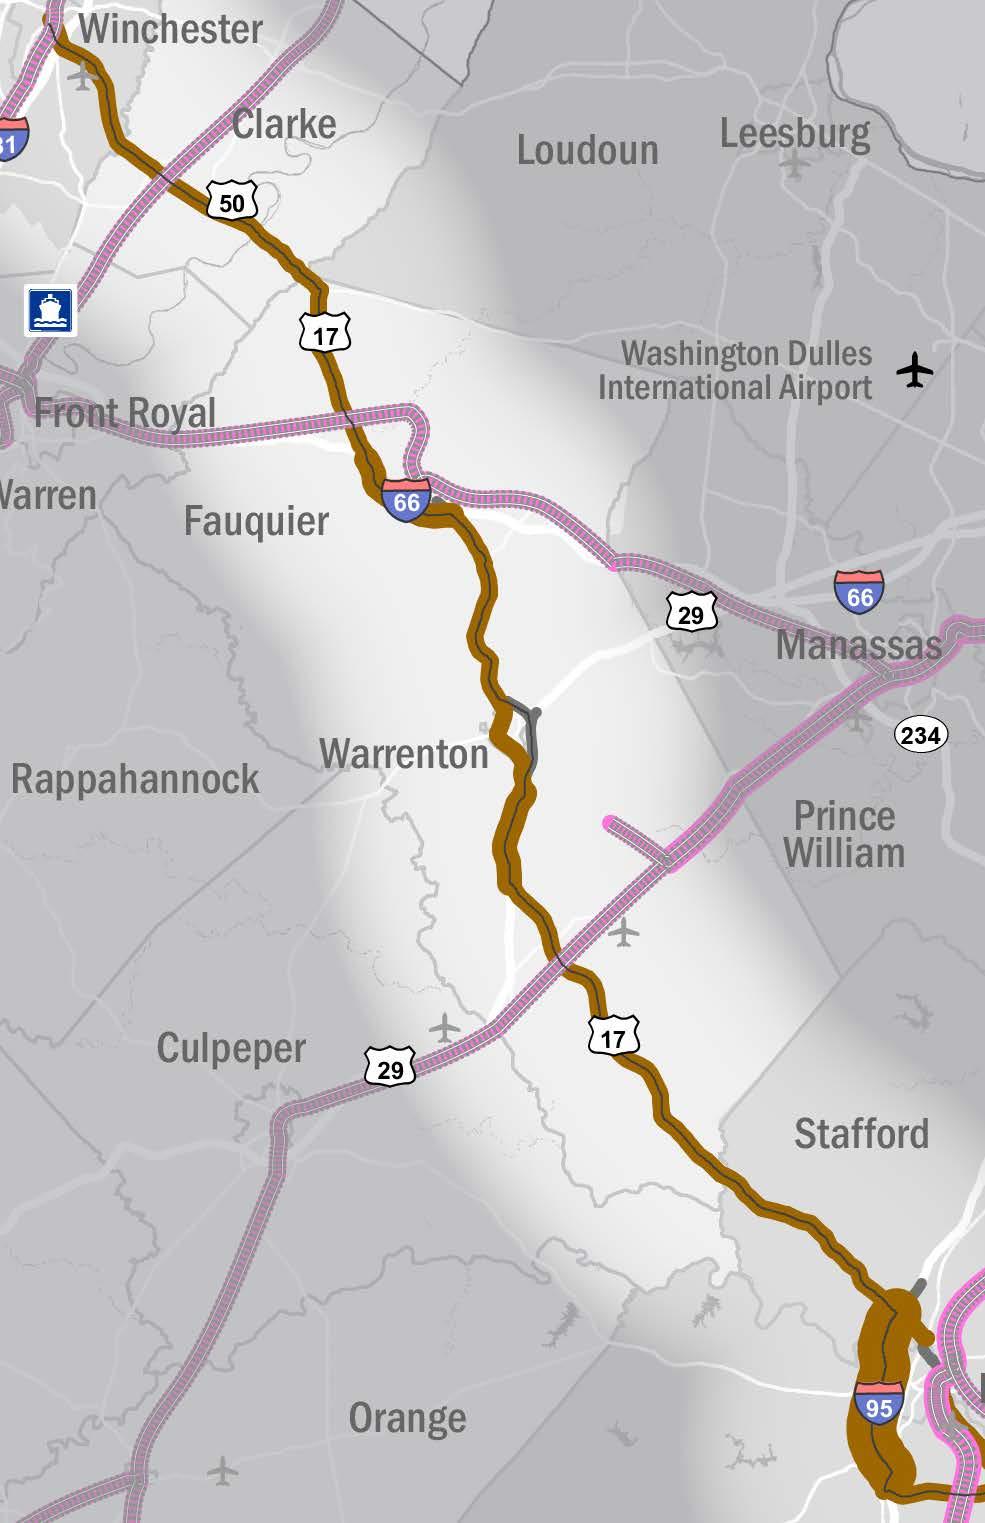 A3 SEGMENT PROFILE Annual Freight by Tonnage, 2012 Freight Flows In the Fredericksburg area, where Segment A3 runs concurrently with I-95, freight is moved primarily by truck, in terms of both